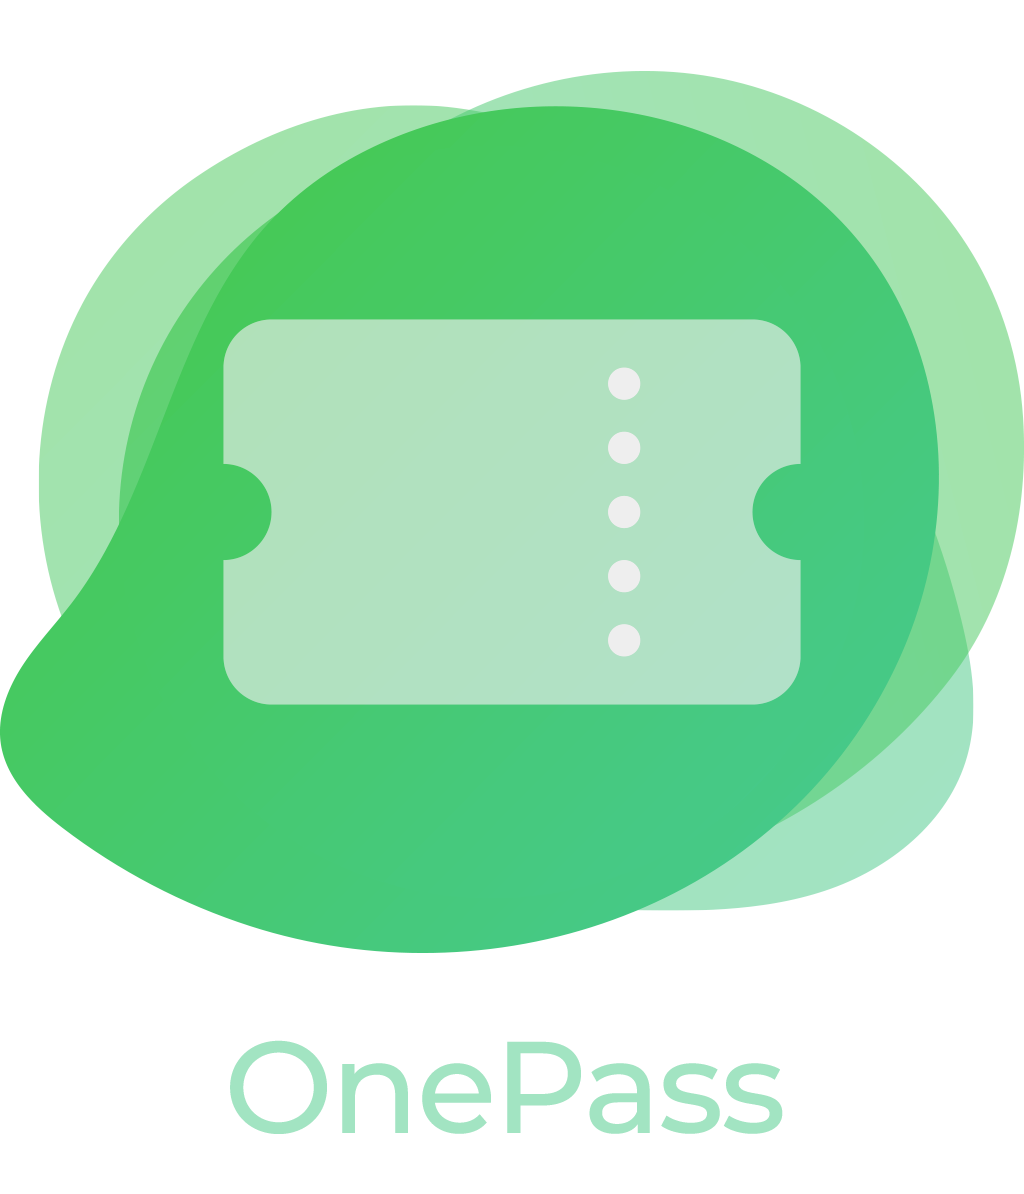 Frontdesk Onepass is a secure and efficient way to manage access control for your event, allowing attendees to easily enter and exit the event venue.